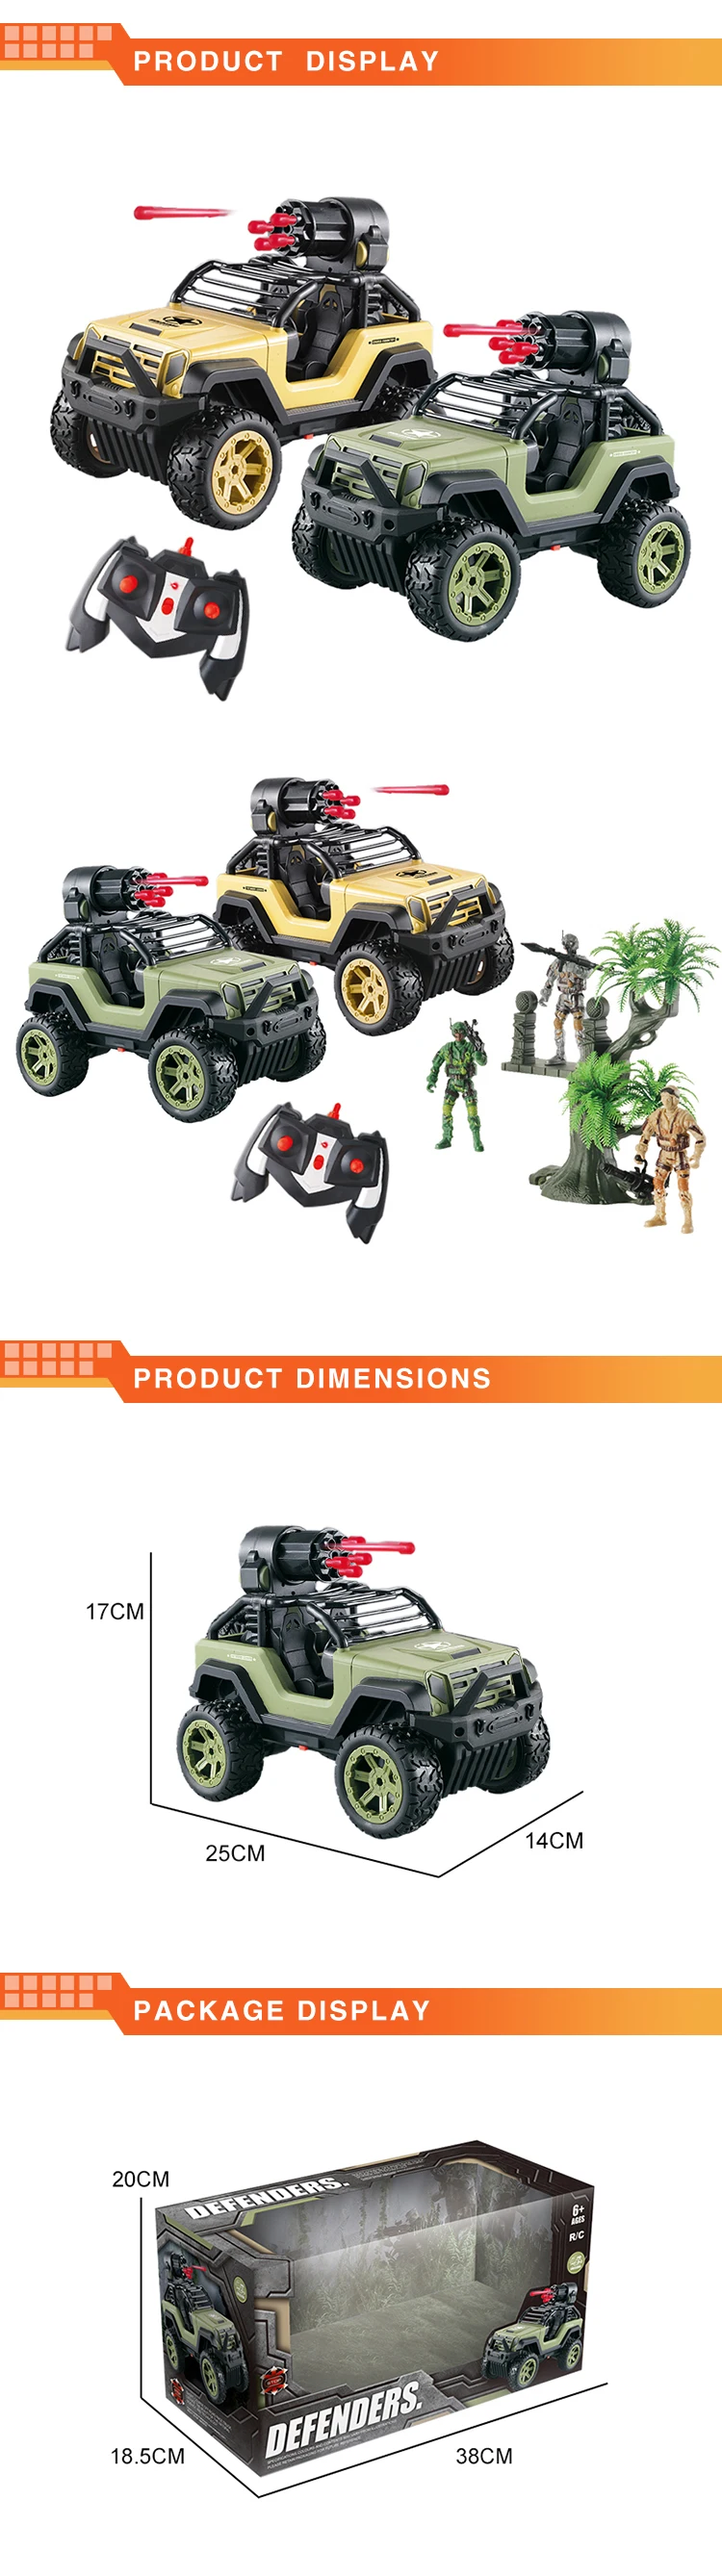 2020 New arrival remote control car can fire bullets military rc truck for kids gift